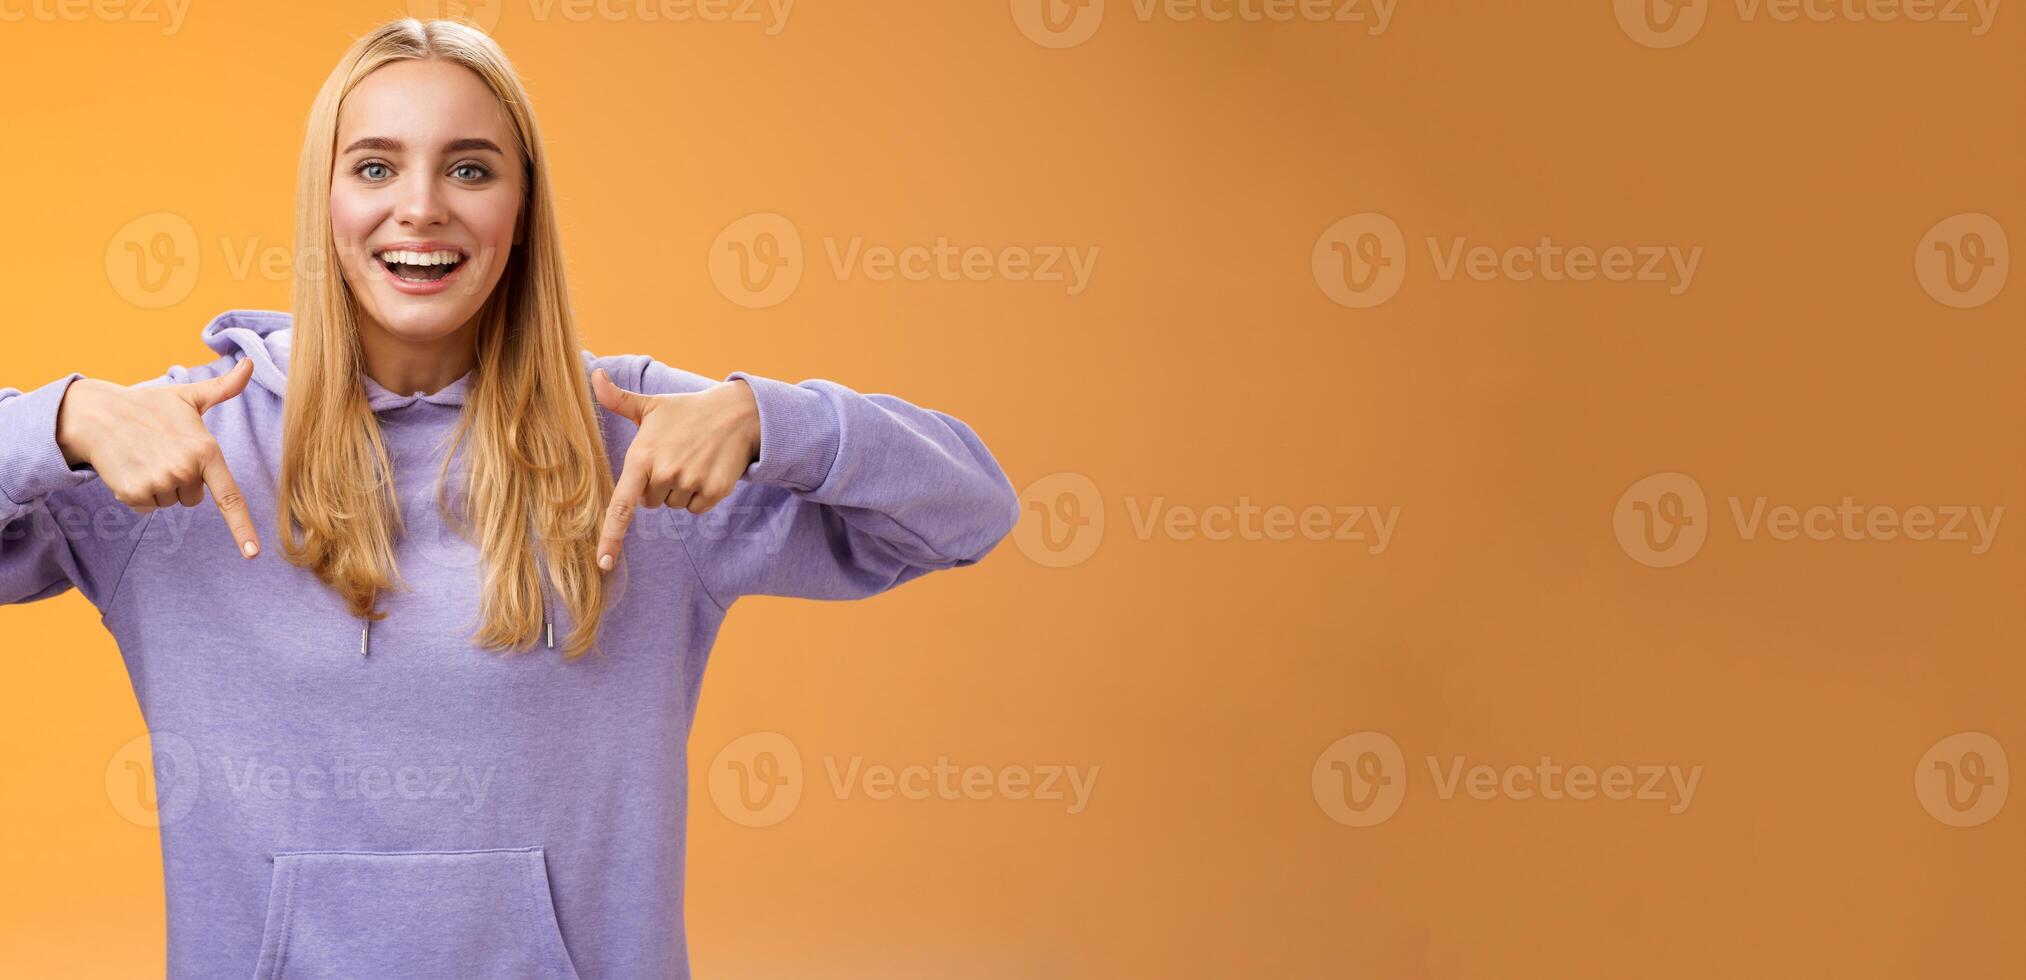 Amused joyful nice blond girlfriend pointing down present cool new product smiling broadly recommending try check out standing orange background happily grinning in hoodie photo